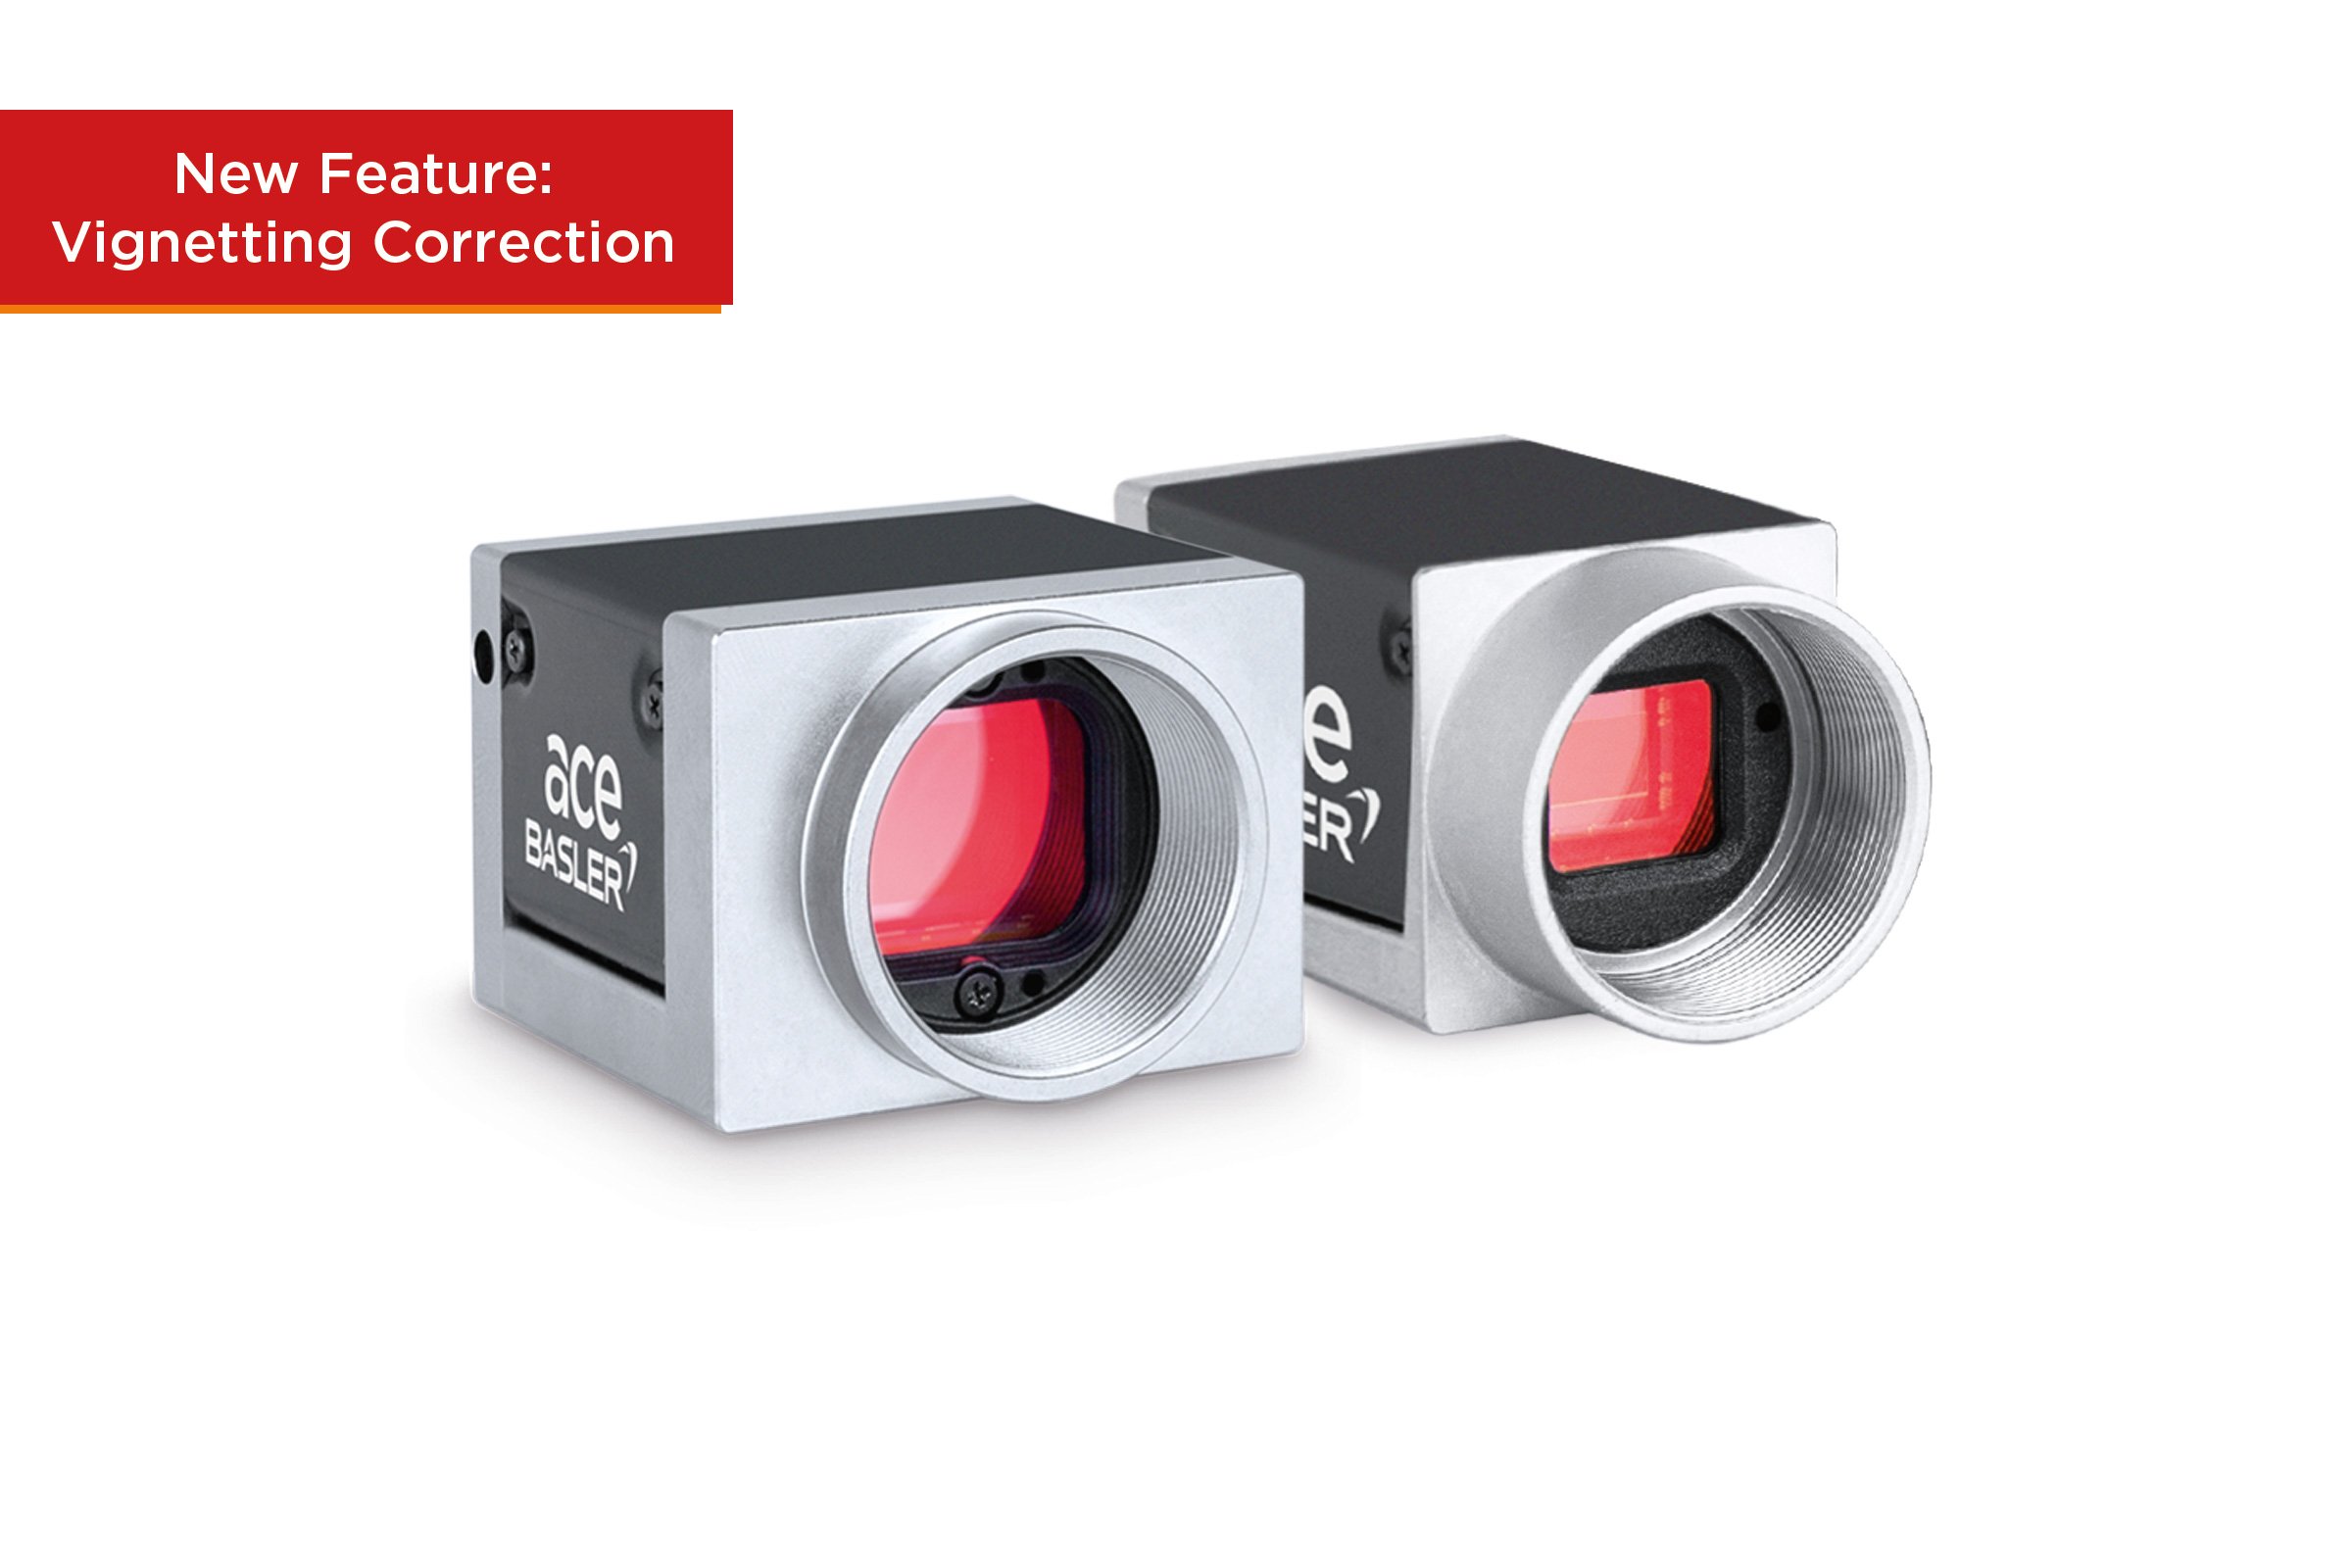 New feature for the Basler ace - Vignetting Correction